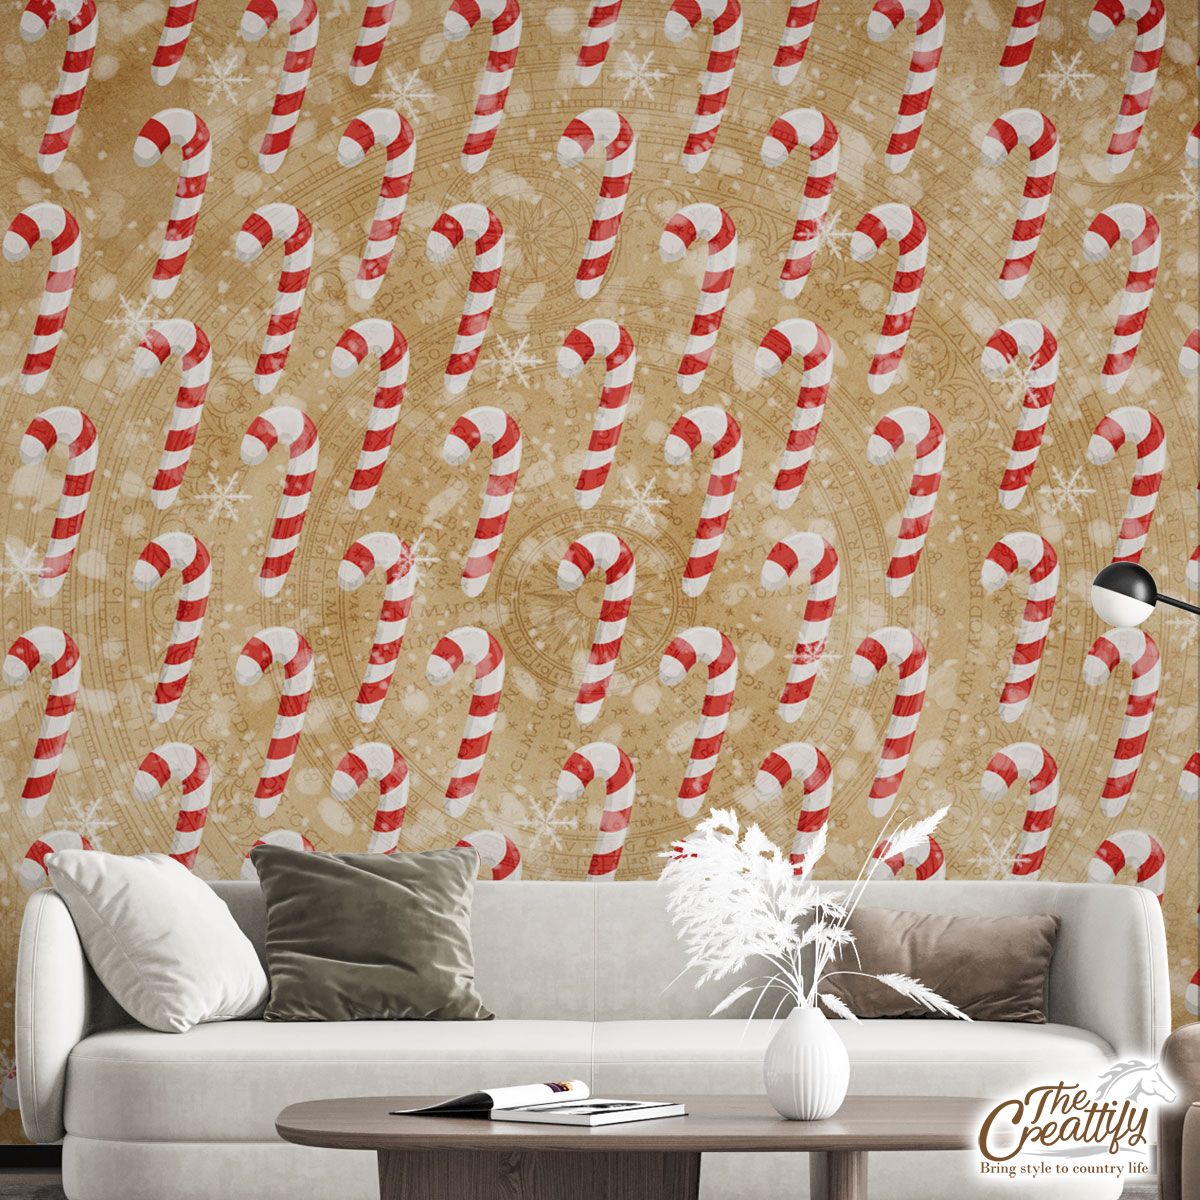 Vintage Christmas With Candy Canes Wall Mural